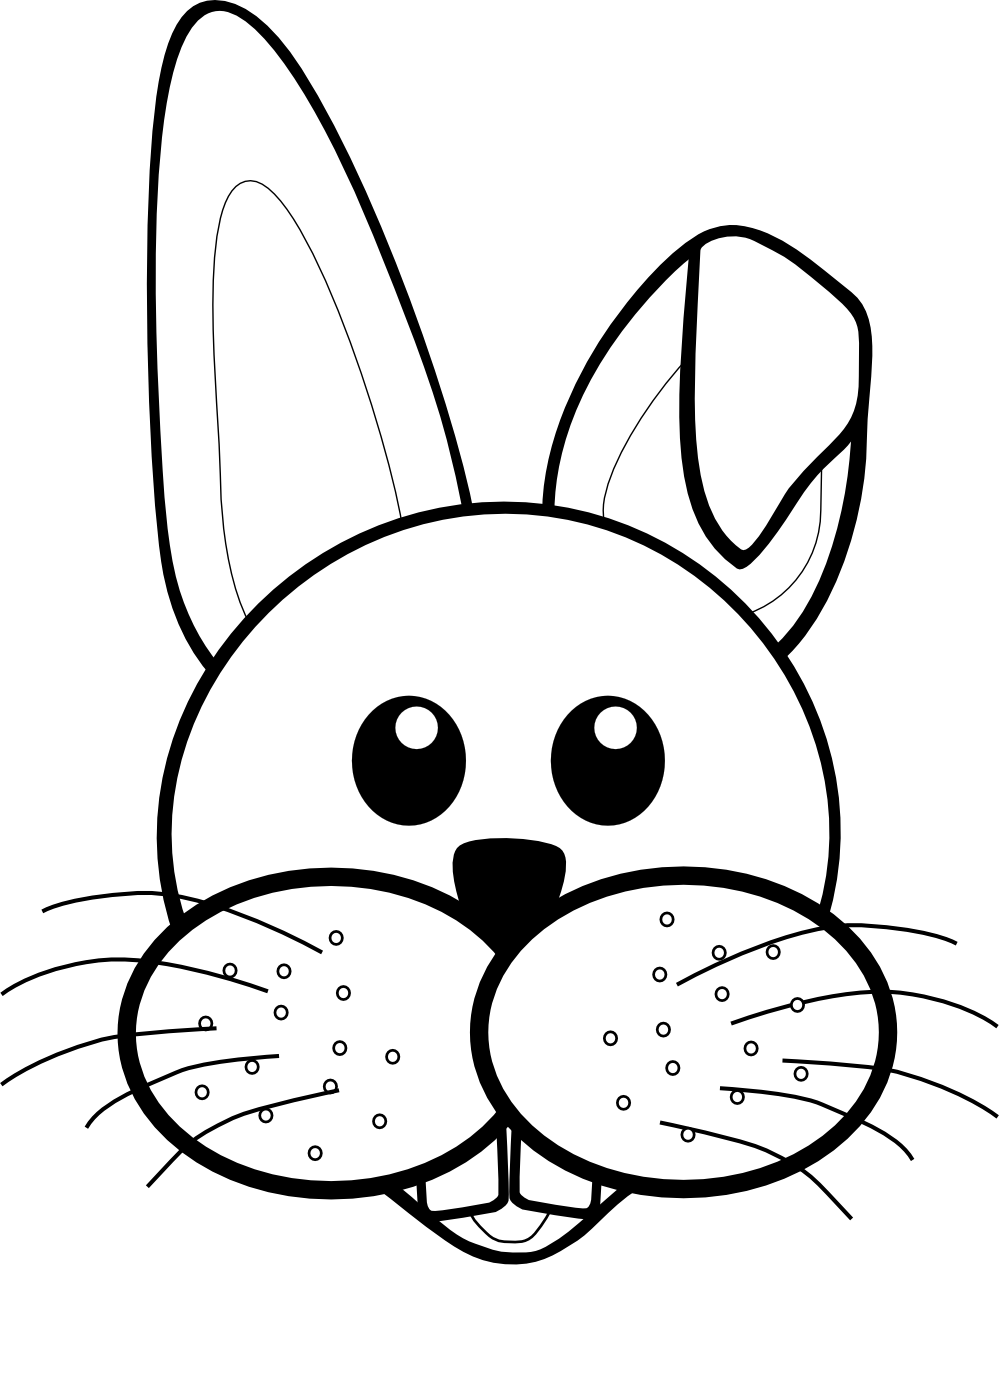 Bunny  black and white rabbit face clipart black and white